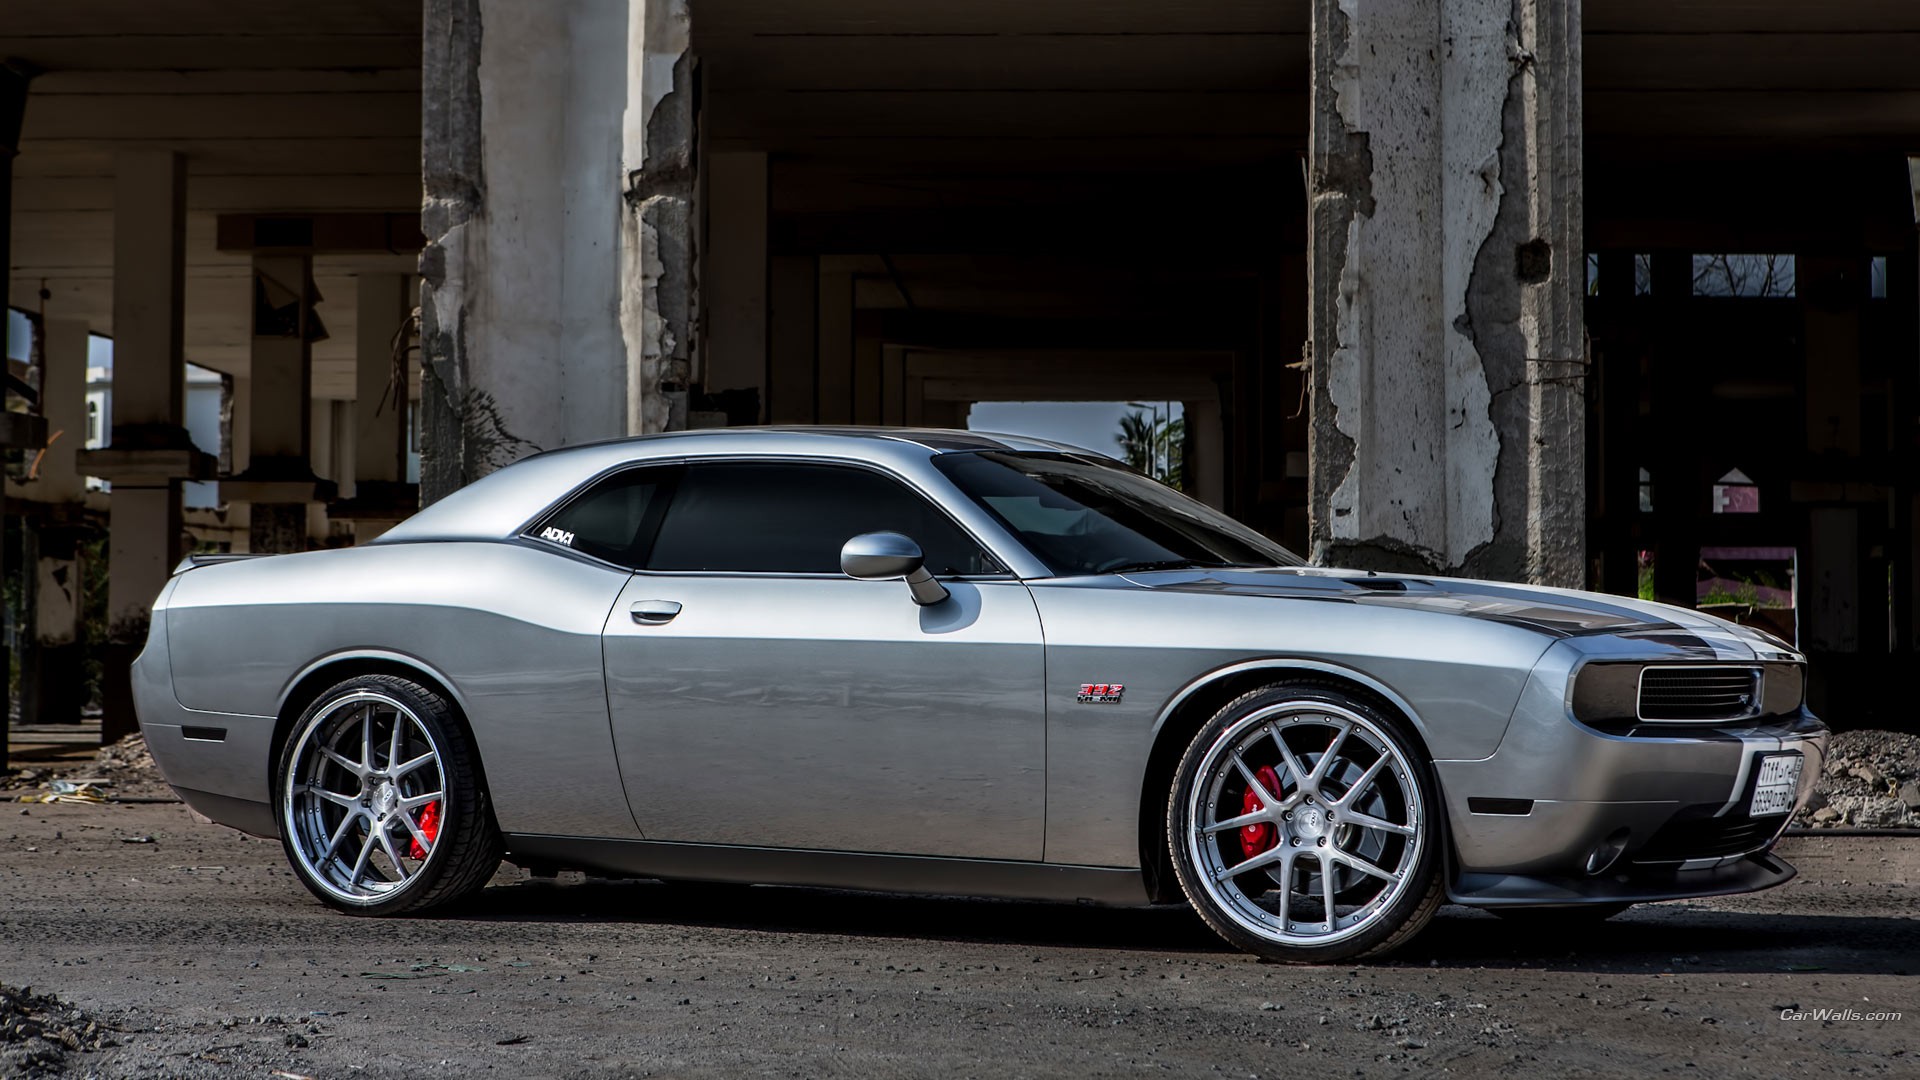 General 1920x1080 Dodge Challenger silver cars car vehicle Dodge muscle cars American cars Stellantis